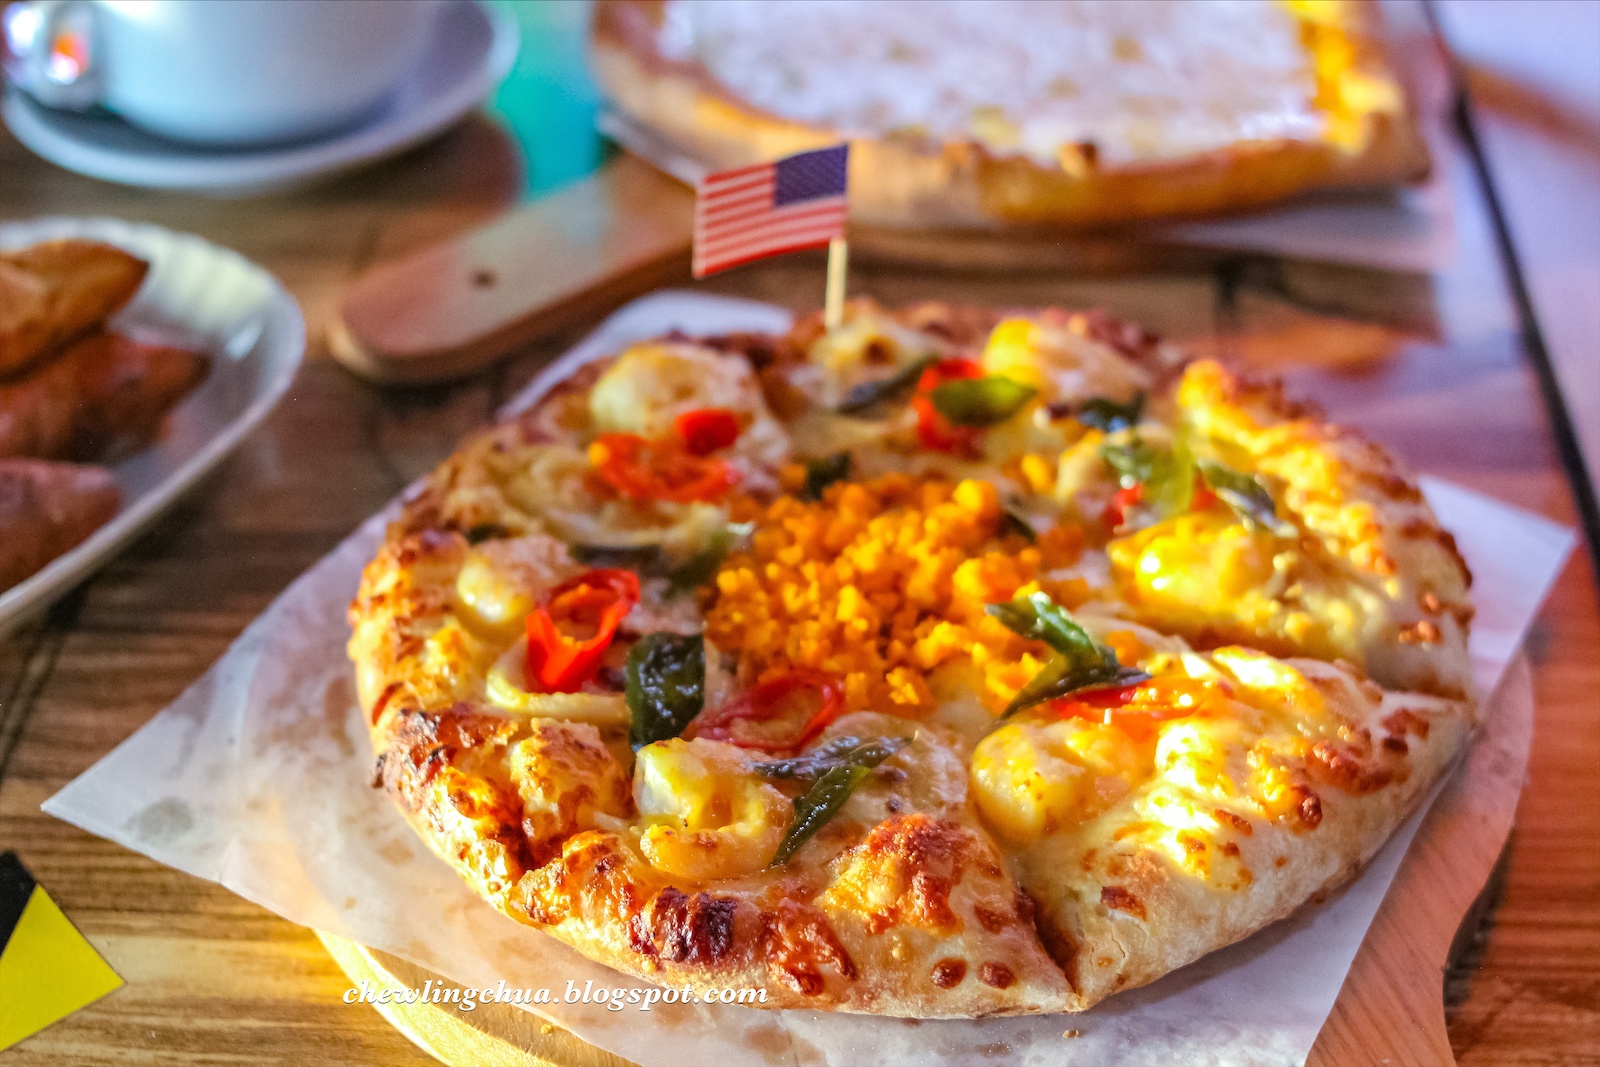 Chewling Chua: US Pizza - the Pizza Professionals @ Ampang Business